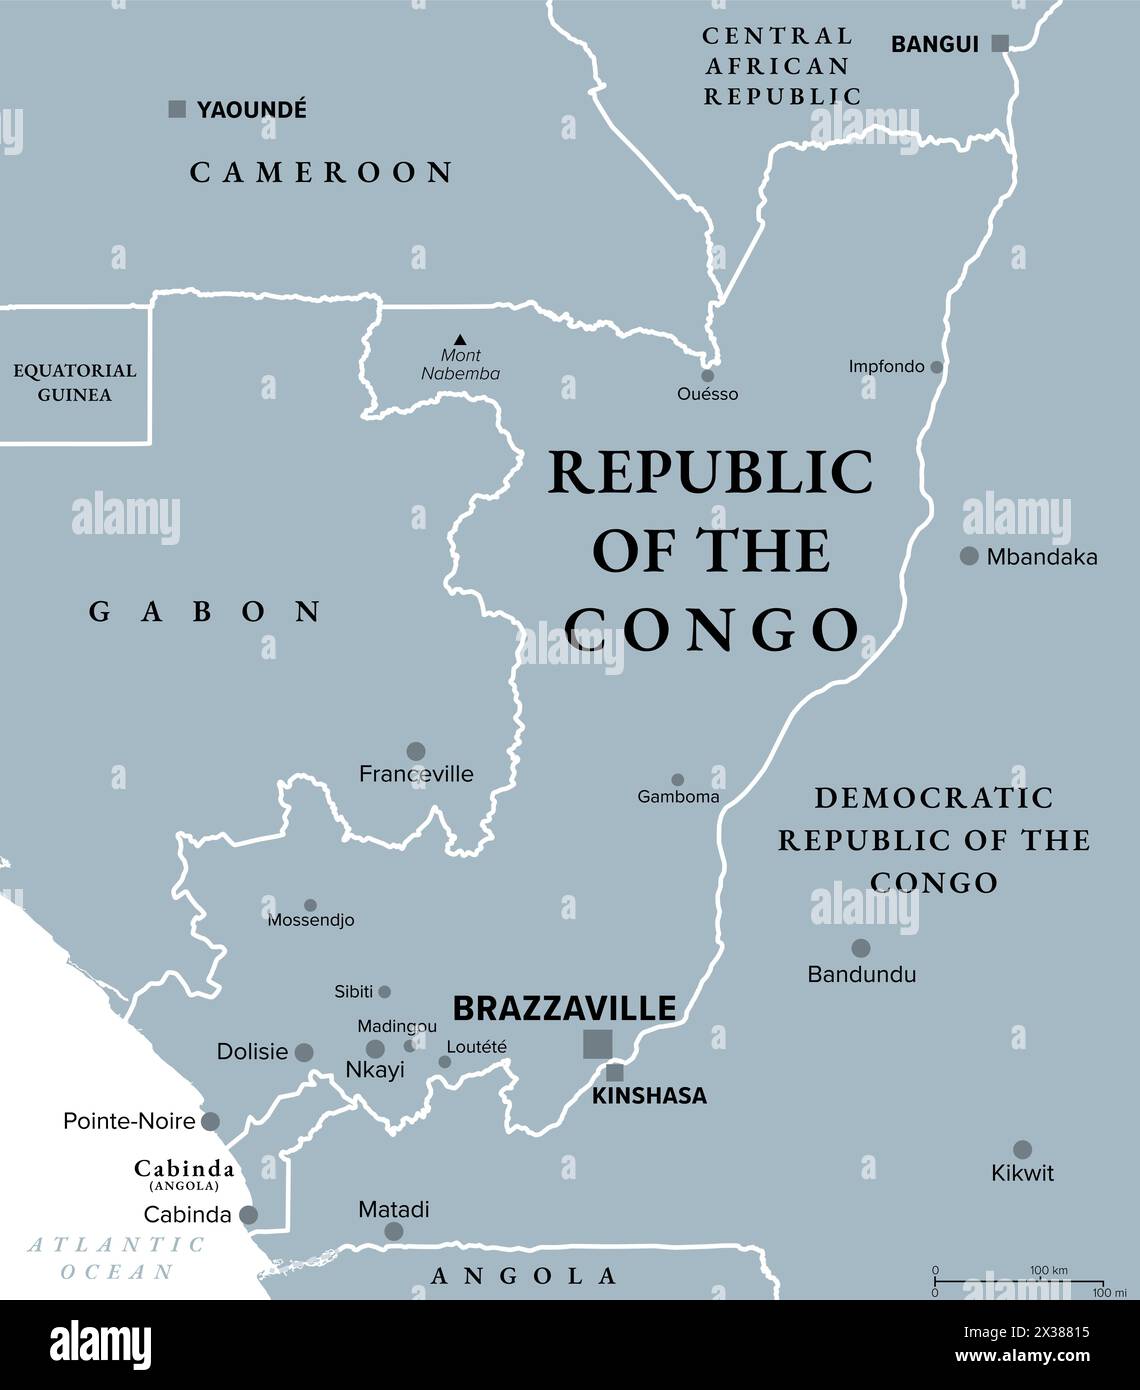 Republic of the Congo, gray political map. Also known as the Congo, a country located on the western coast of Central Africa, with capital Brazzaville. Stock Photo